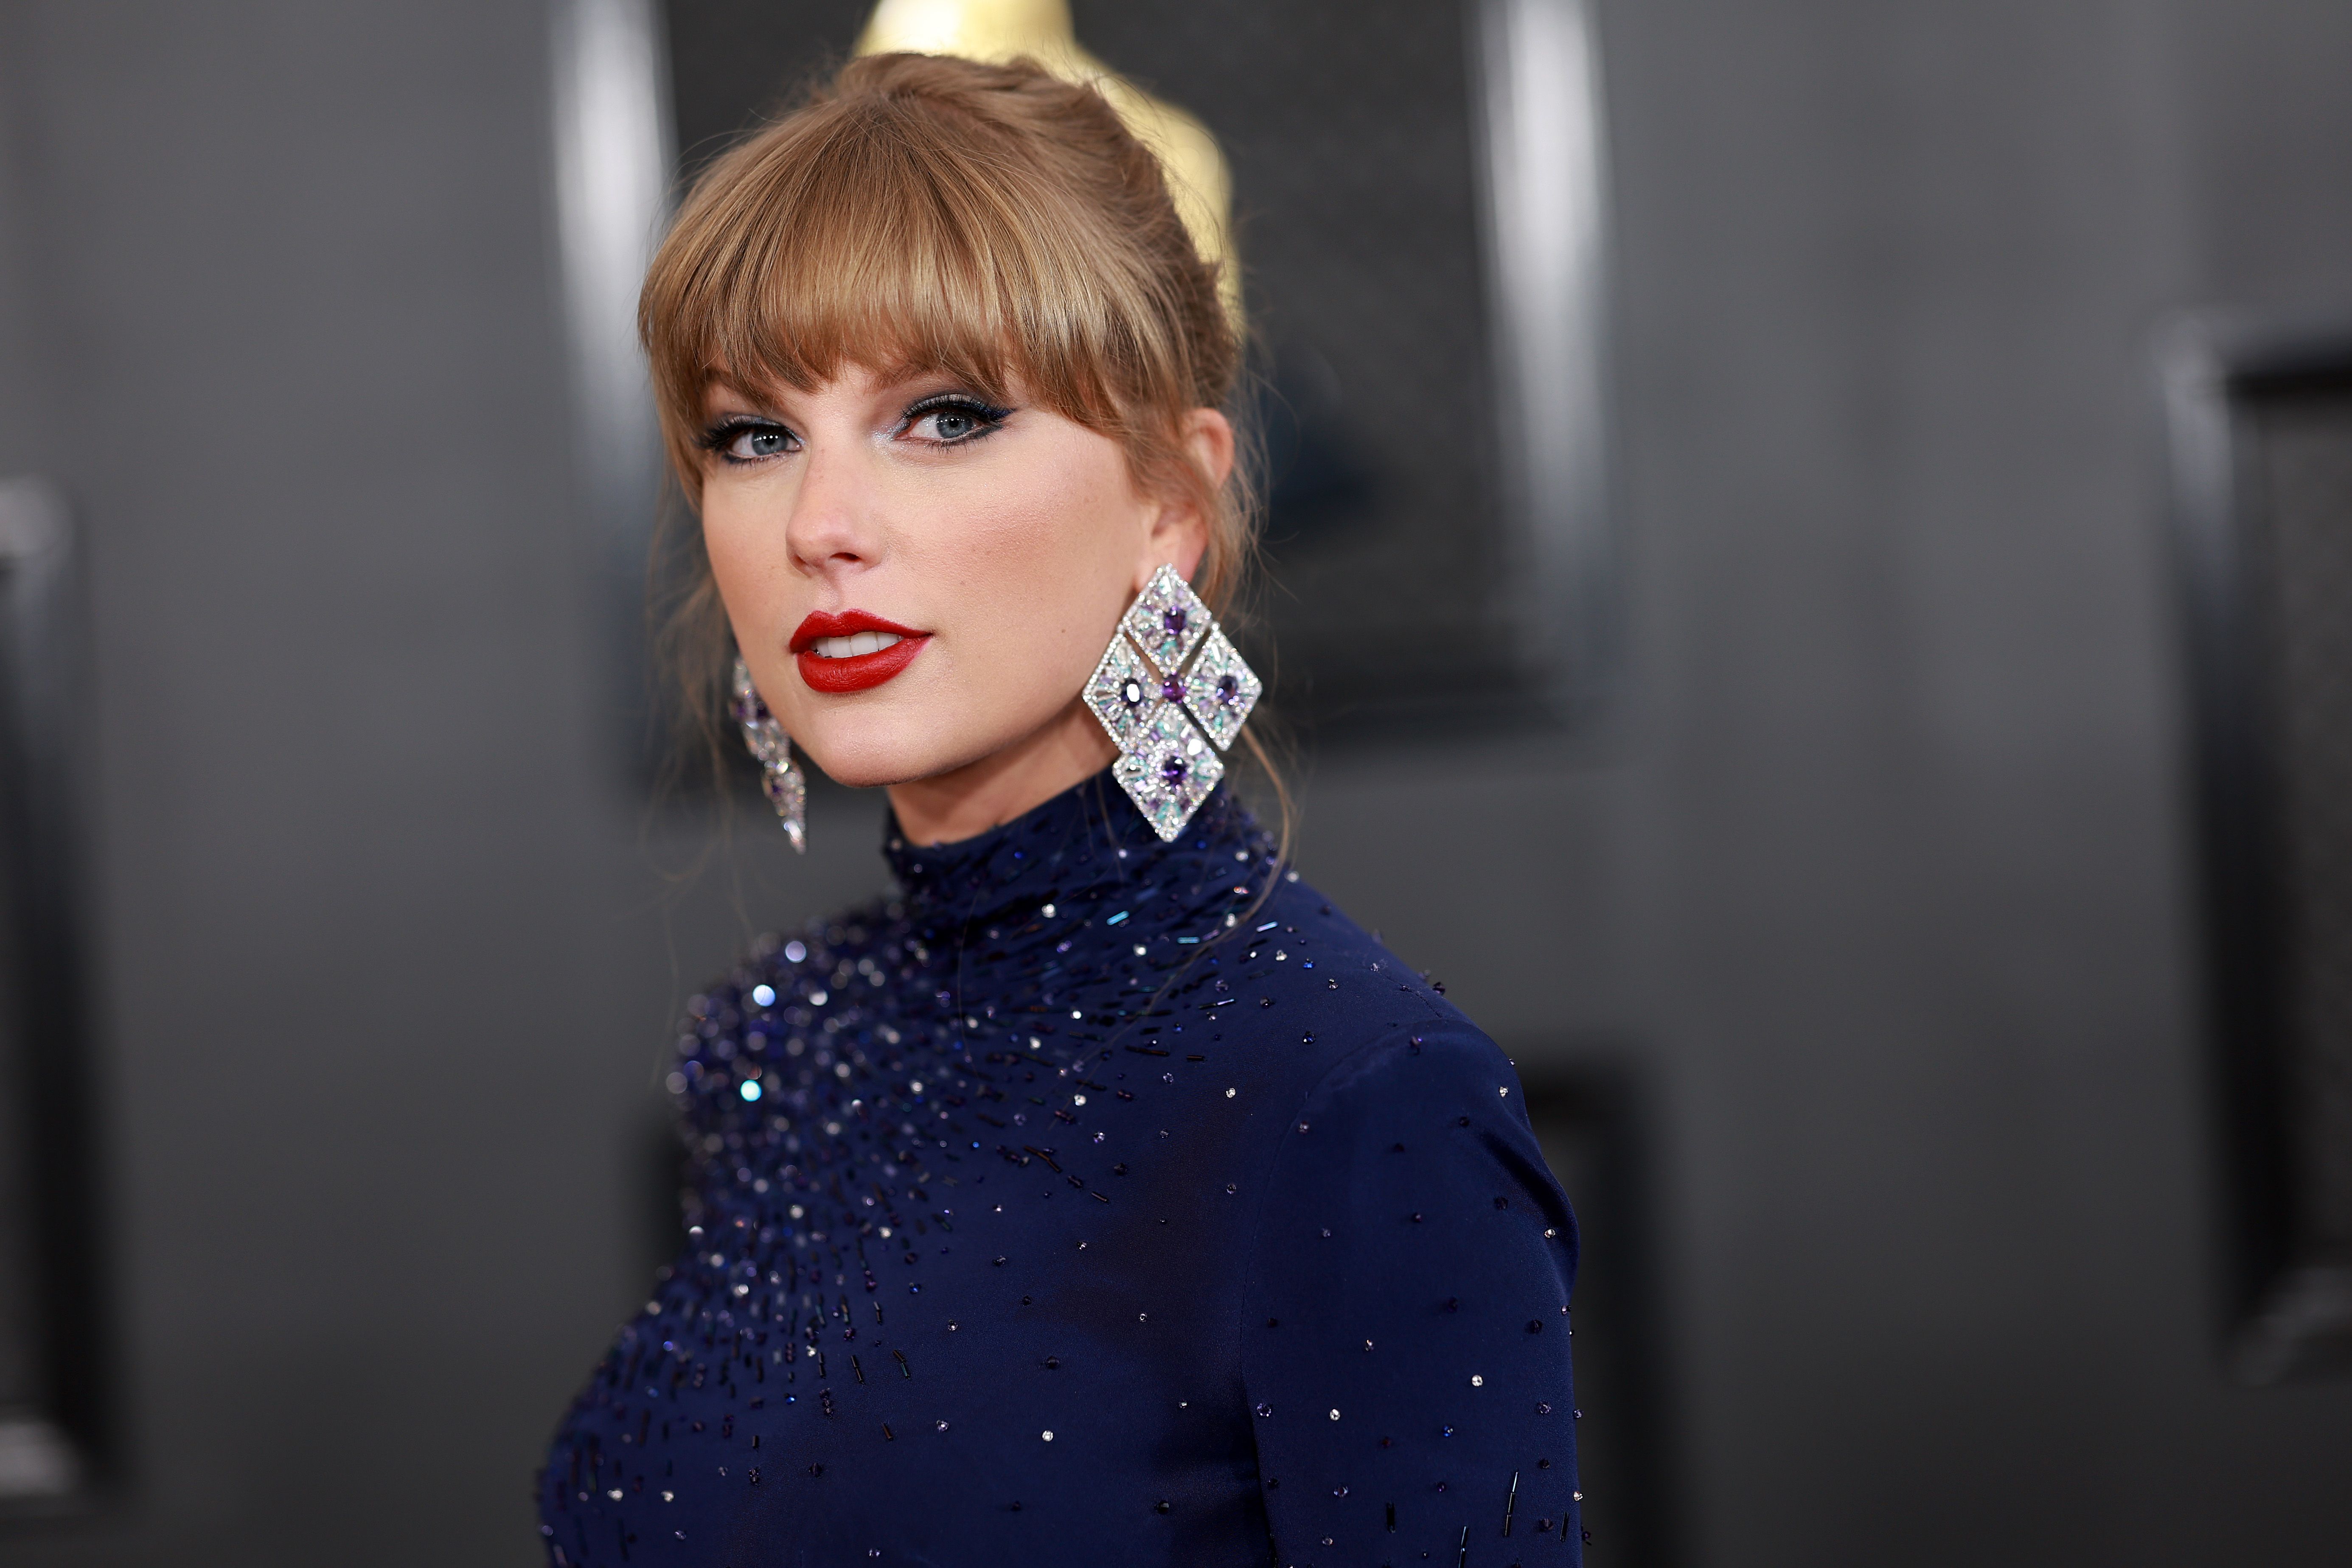 What Brand of Red Lipstick Does Taylor Swift Wear? We Found Out